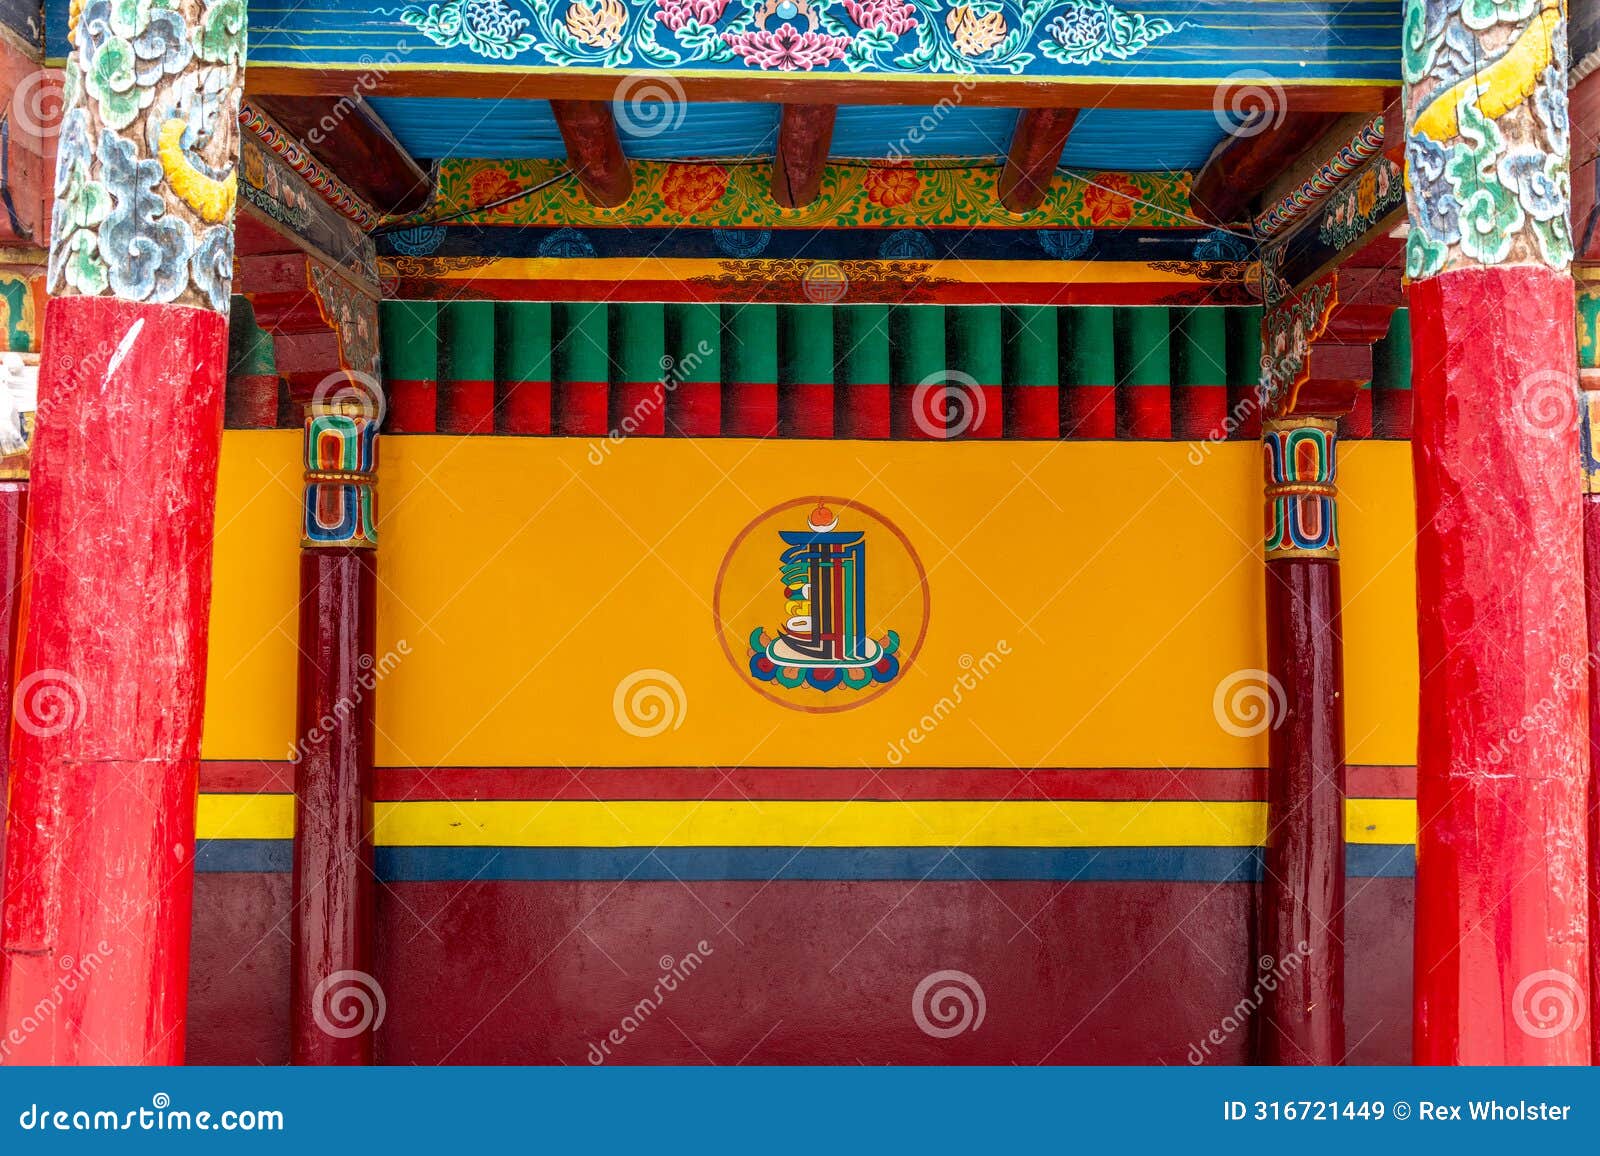 artwork at a landmark buddhist monastery in the northern india himilayas